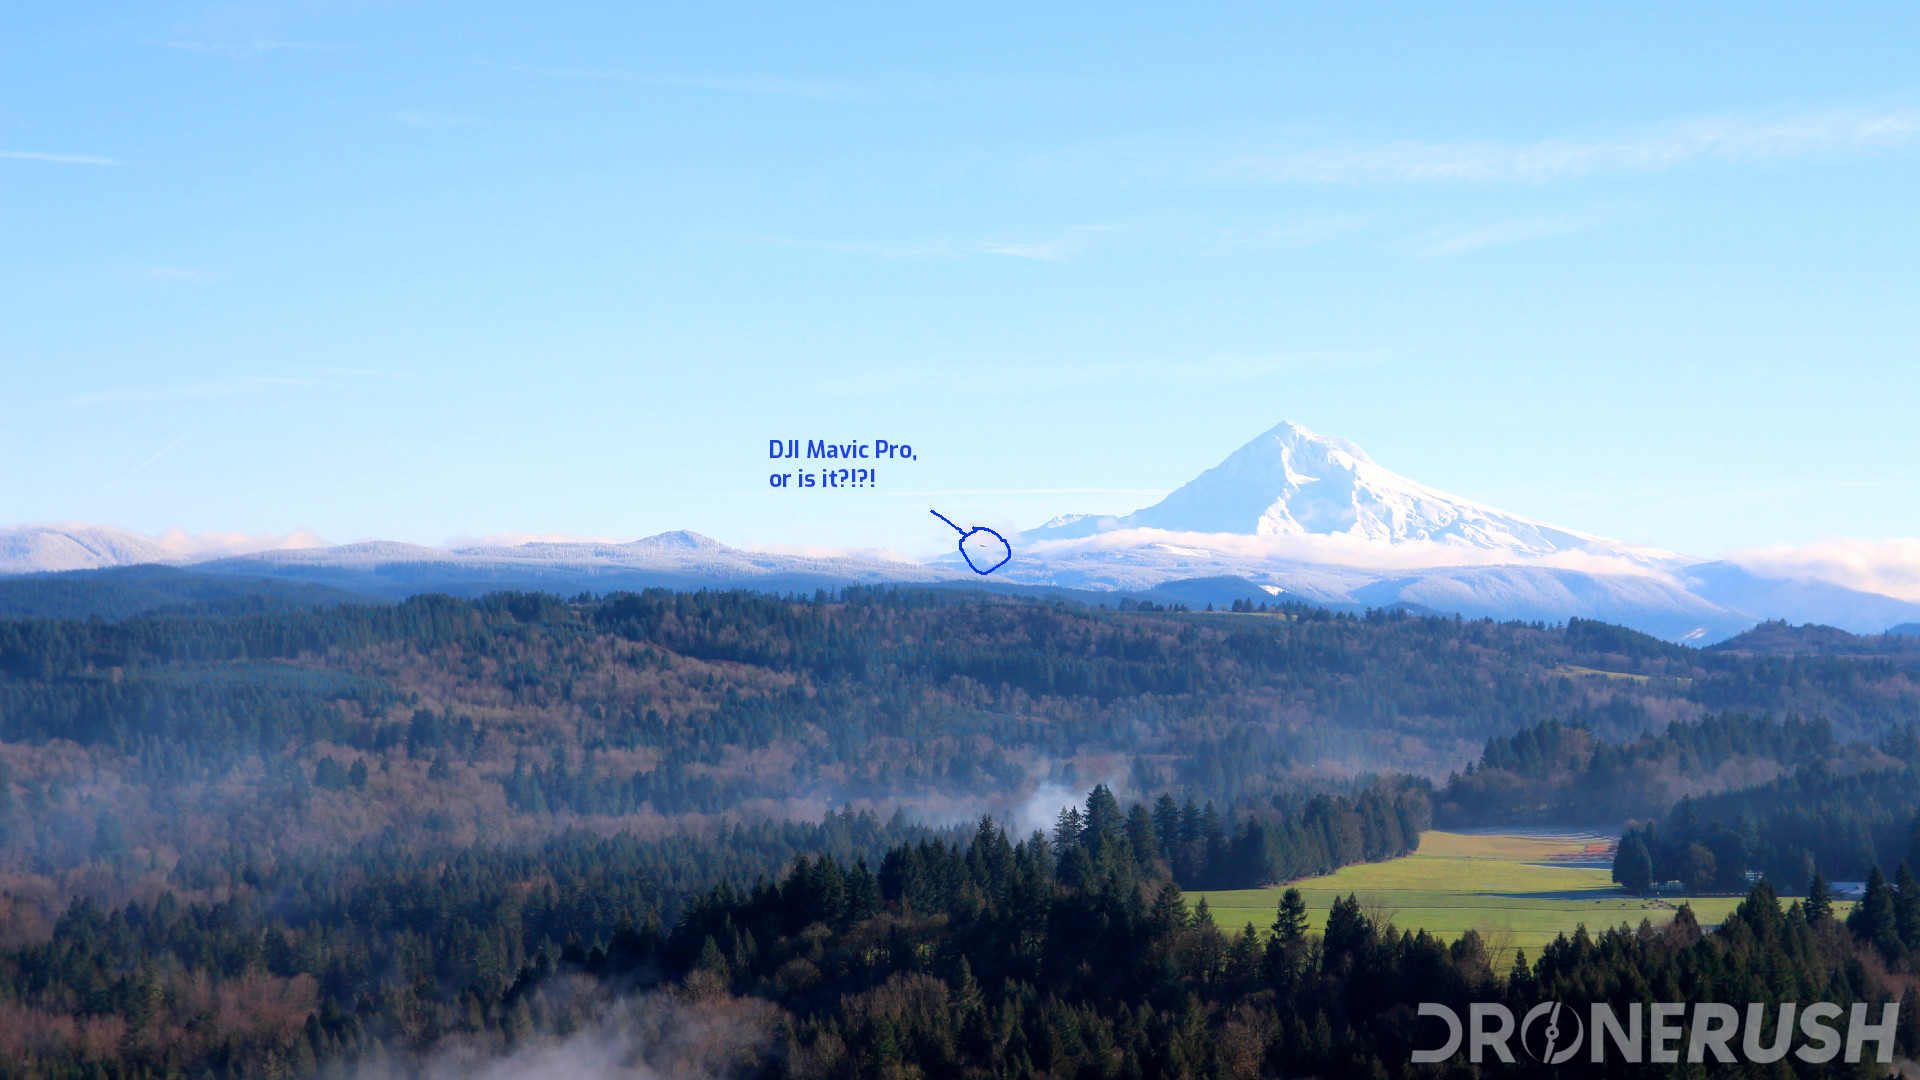 Is that the Mavic Pro in front of Mt Hood